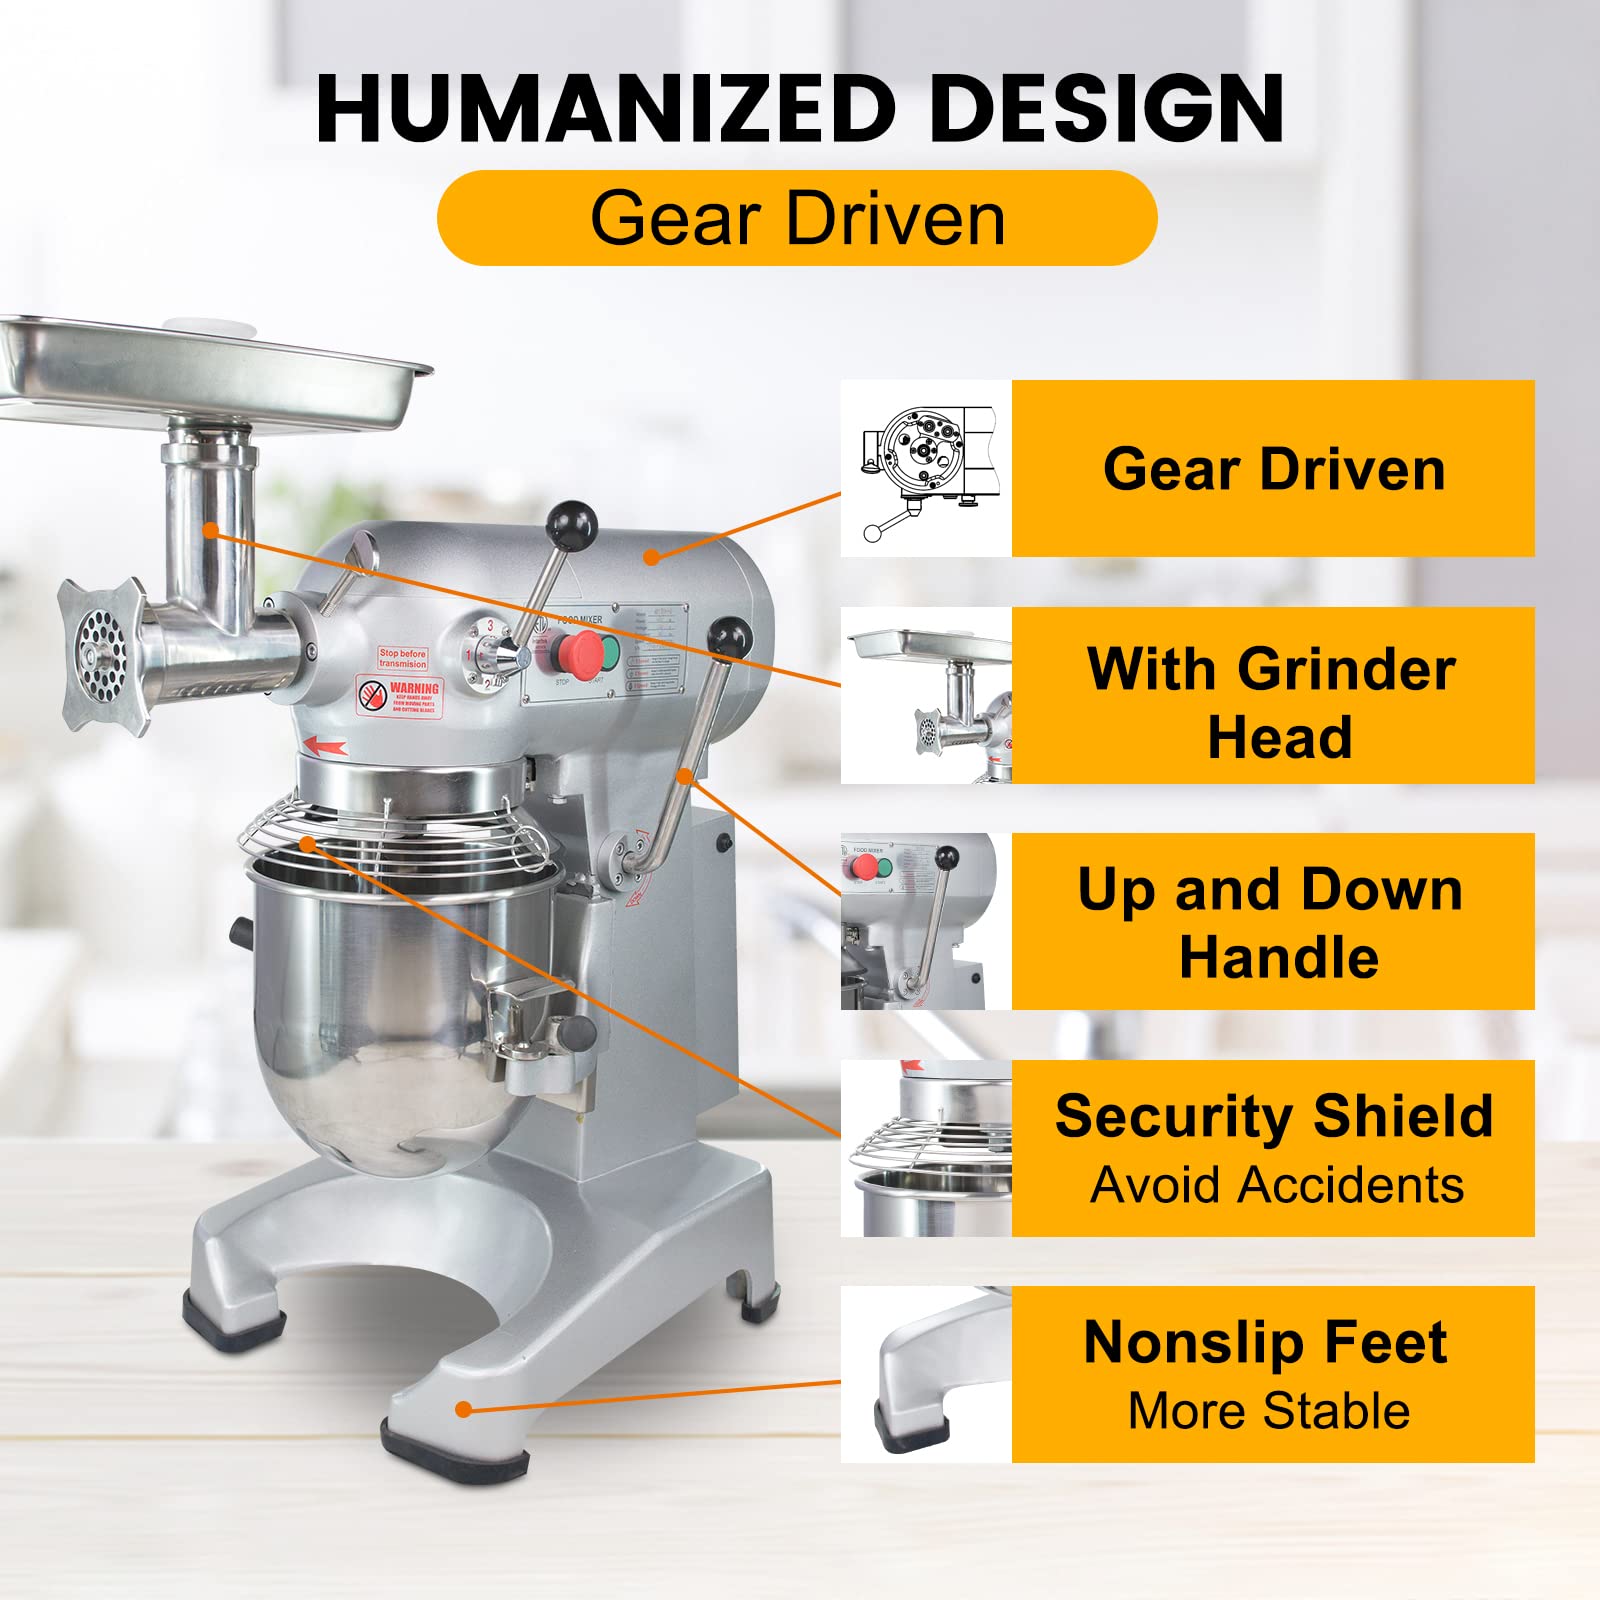 Hakka 30 Quart Commercial Planetary Mixers 4 Funtion Stainless Steel Food Mixer with Meat Grinder Head,ETL certified (M30A-4-G)